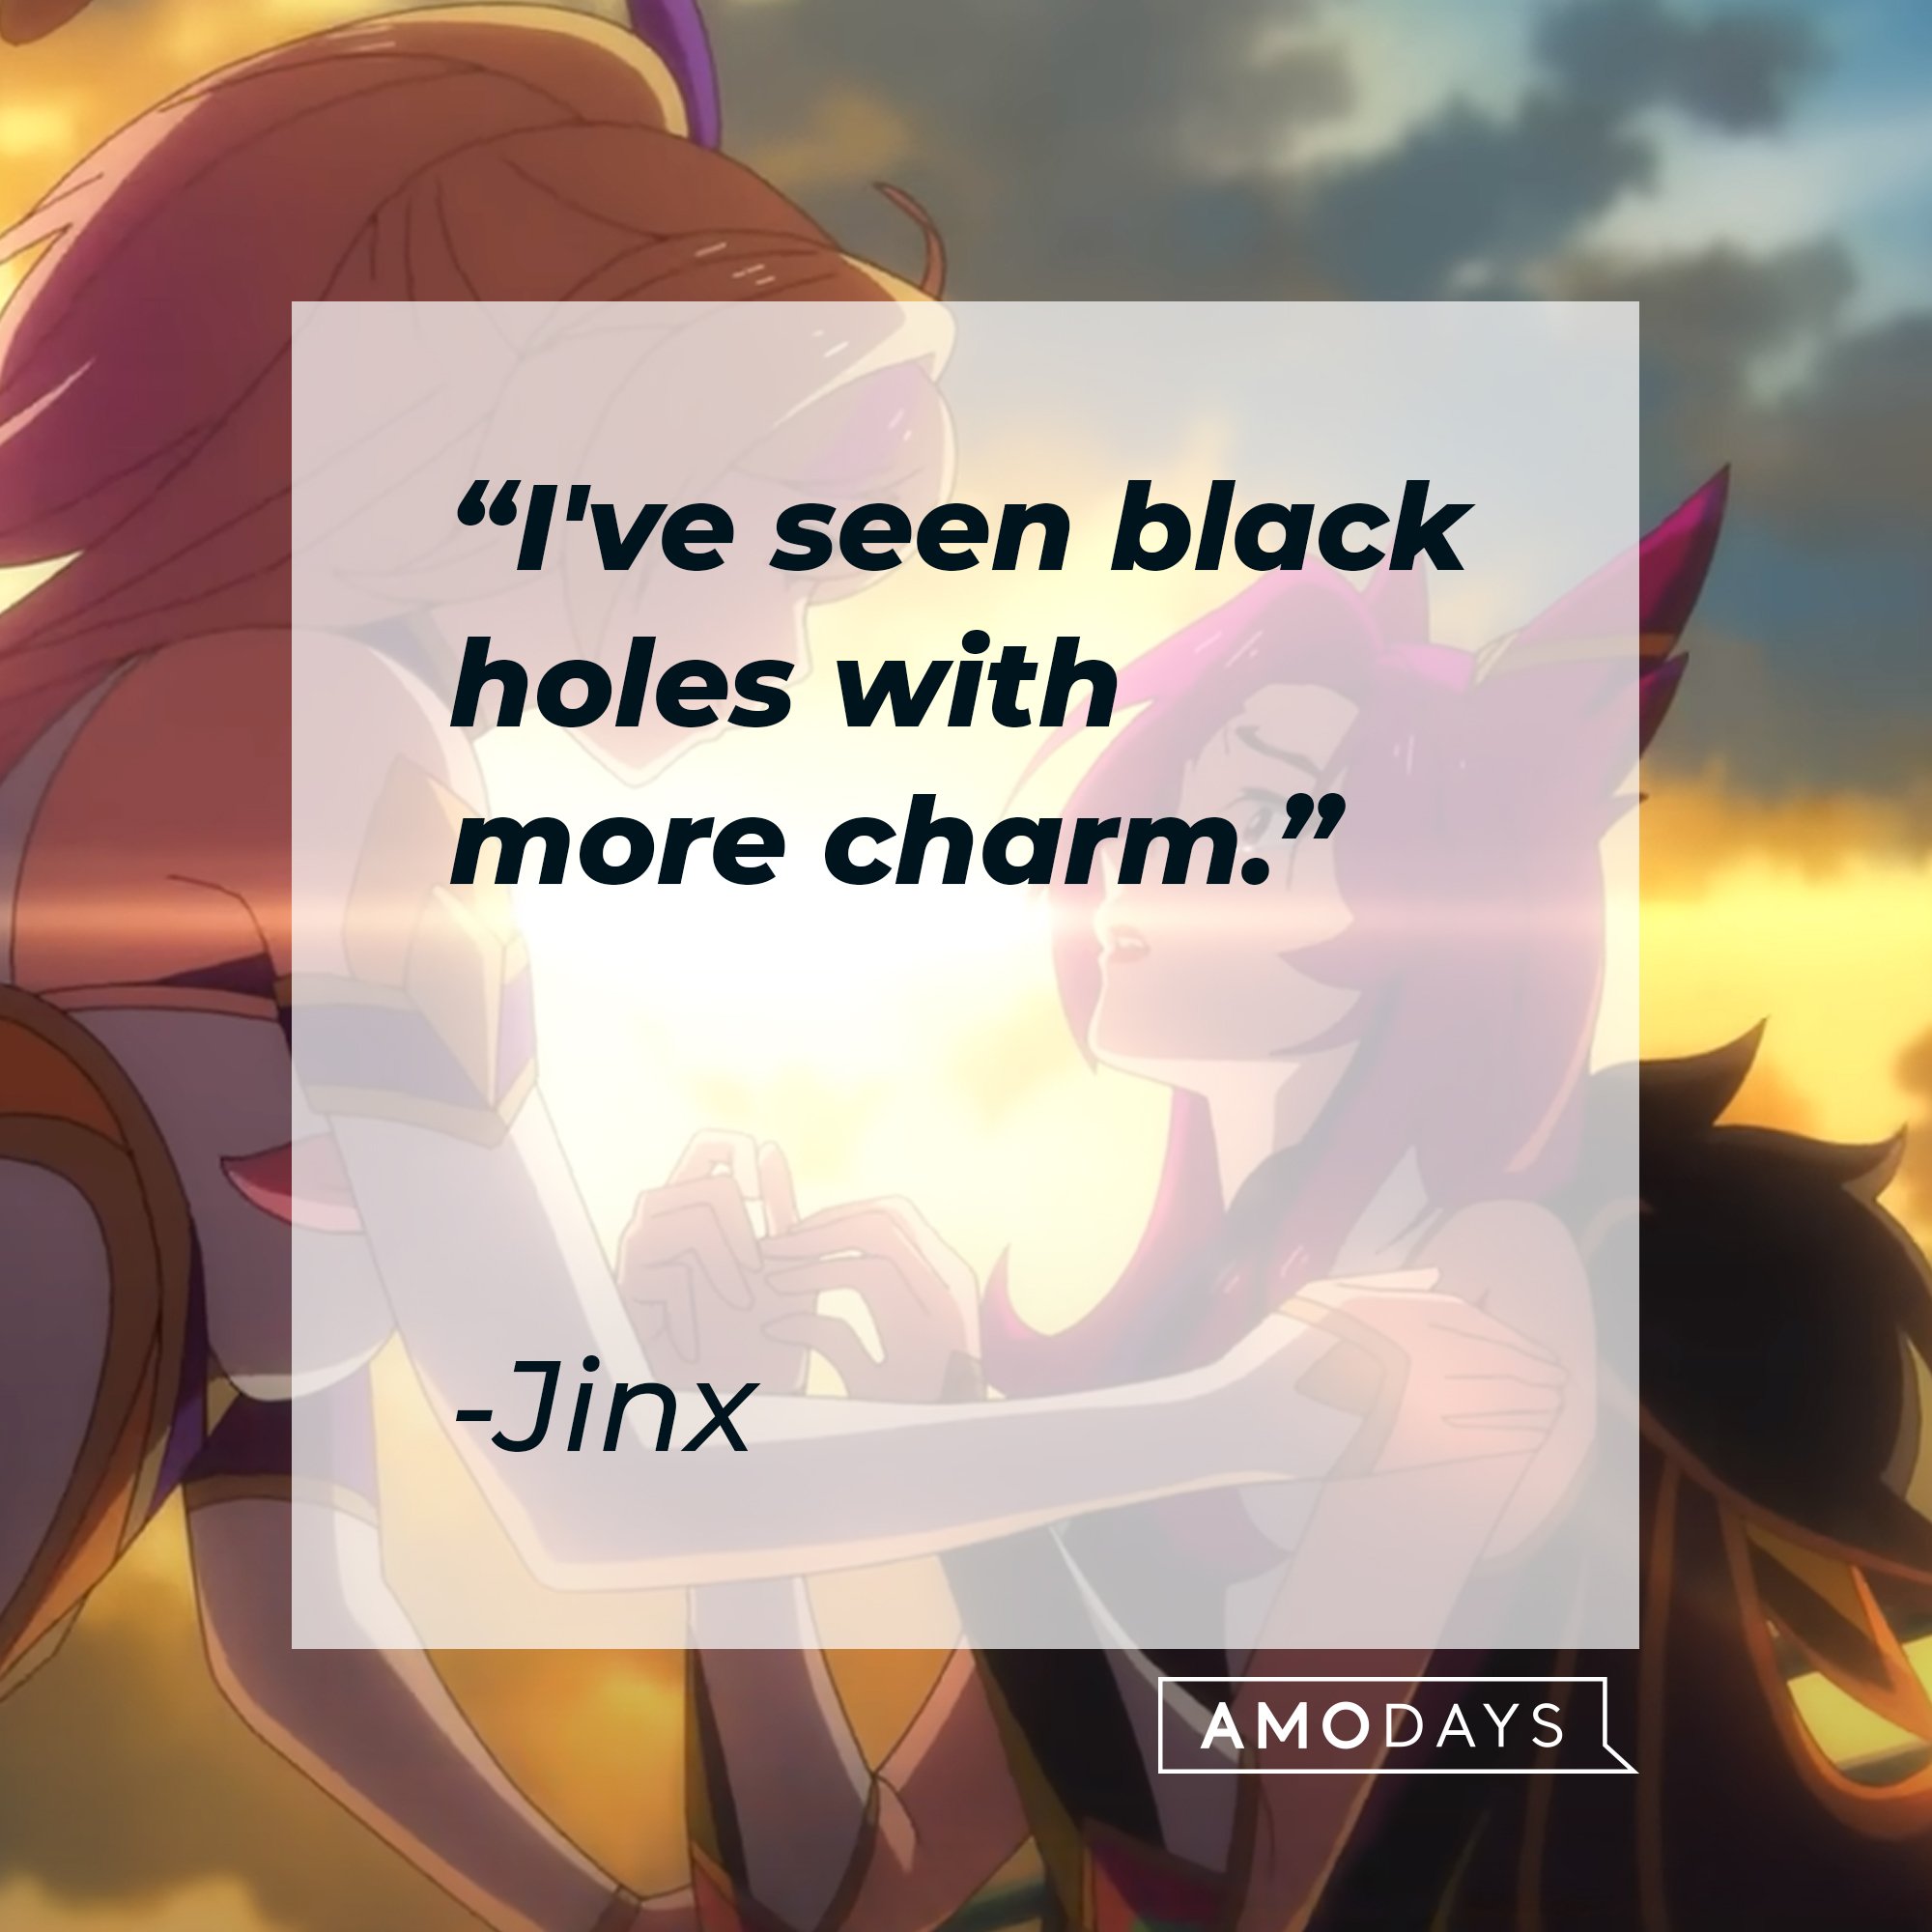 Jinx's quote: "I've seen black holes with more charm." | Image: AmoDays